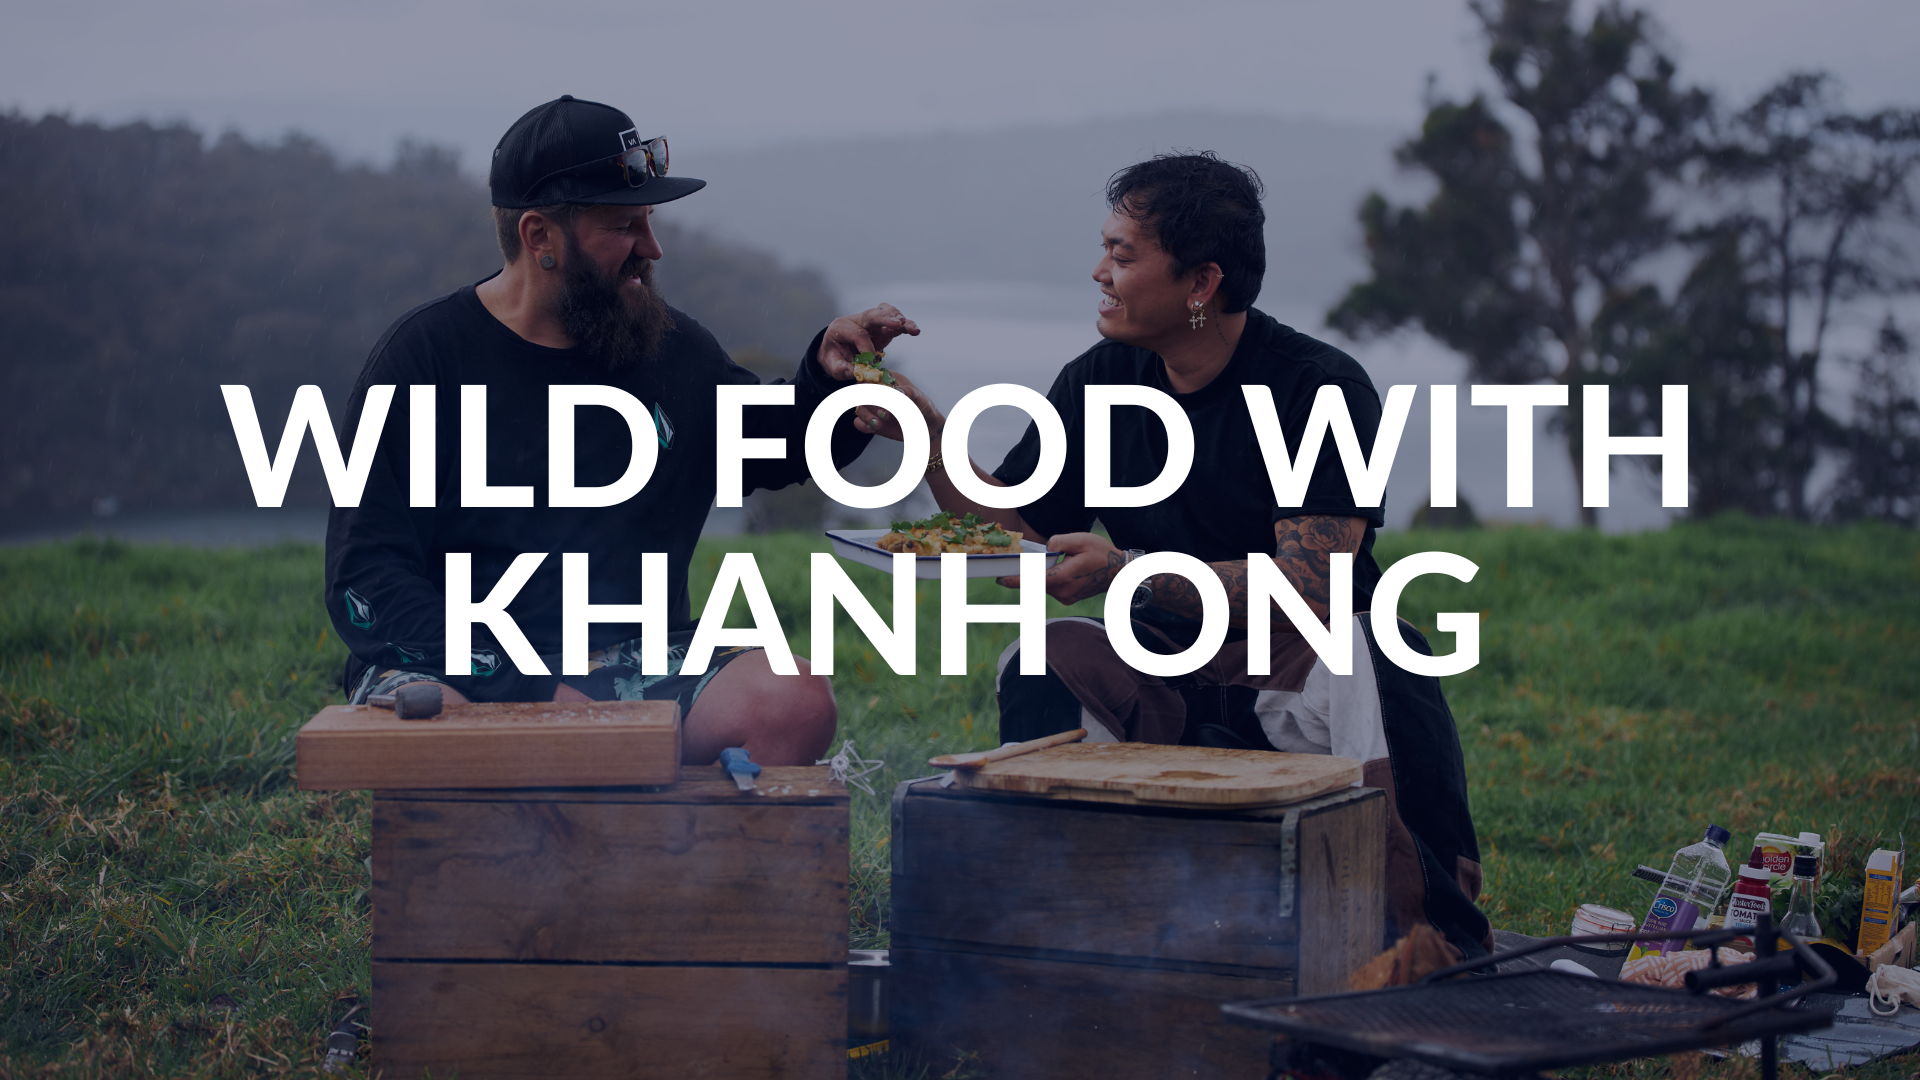 WILD FOOD WITH KHANH ONG